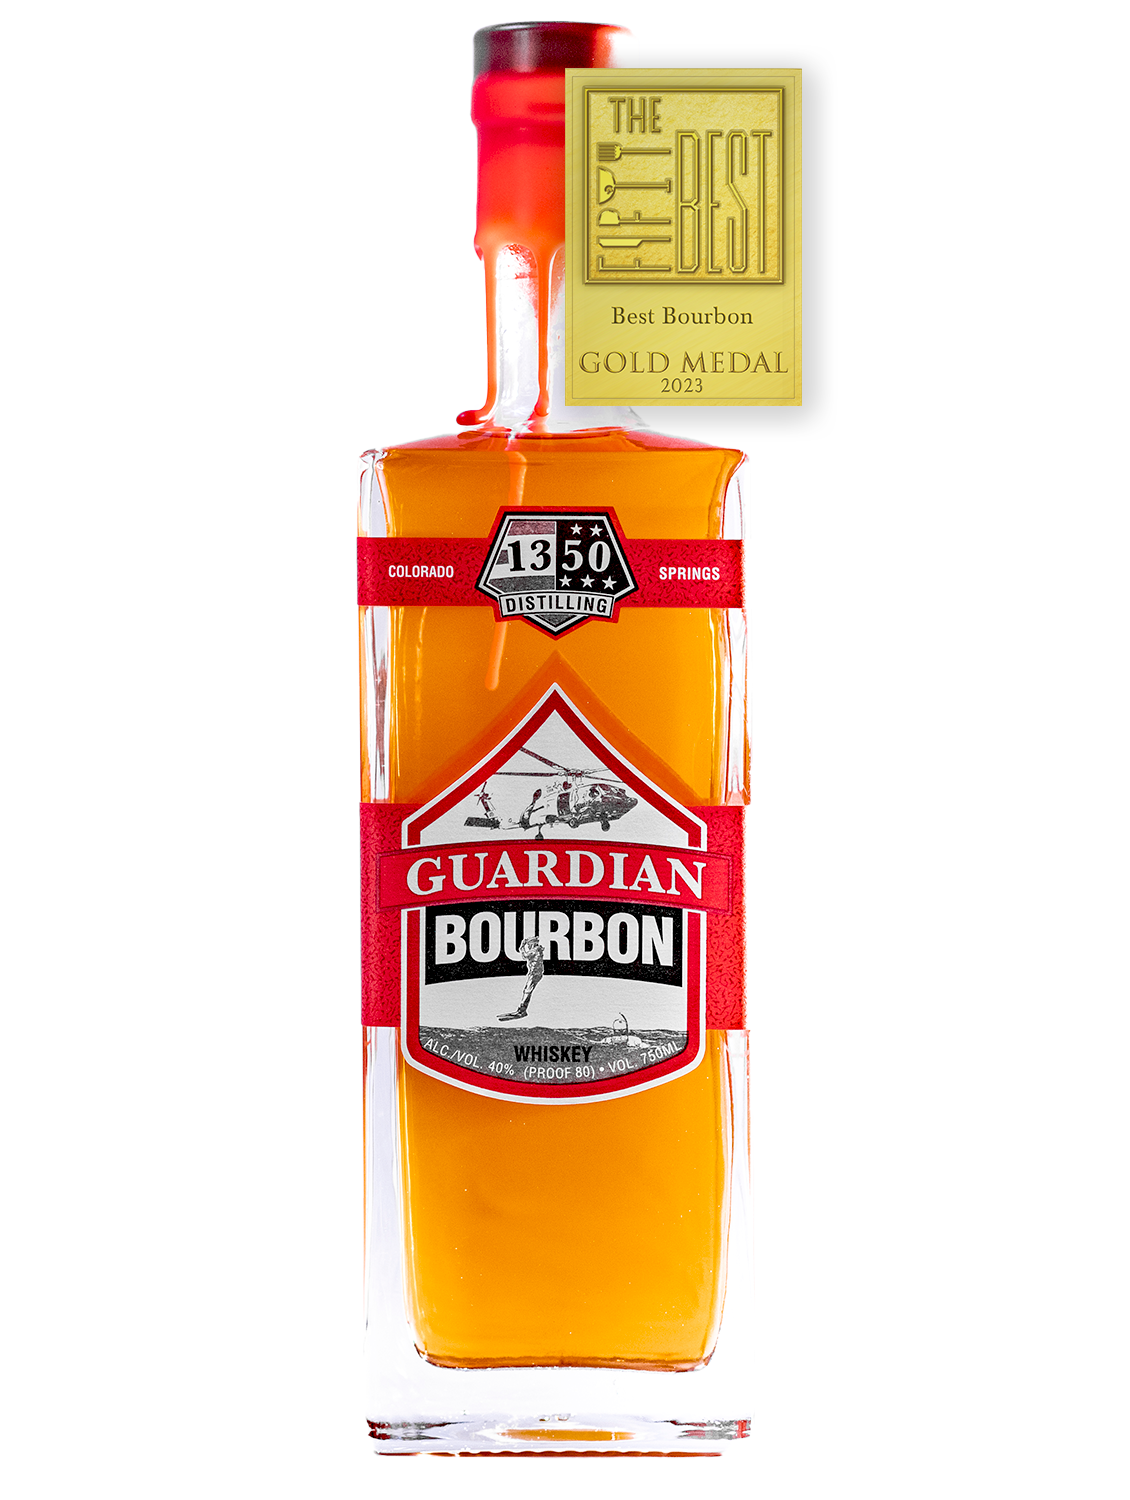 Gold Medal for The Fifty Best Bourbon of 2023 sits over a rectangular tall bottle with two U.S. Coast Guard orange labels spanning across all sides of the bottle with a white background. Hand-dipped U.S. Coast Guard orange wax drapes over the cork and neck of the bottle. An illustration of a U.S.C.G. Sikorsky helicopter with a search and rescue diver jumping into water is behind the words “Guardian Bourbon”. The 1350 Distilling logo is centered at the top label.